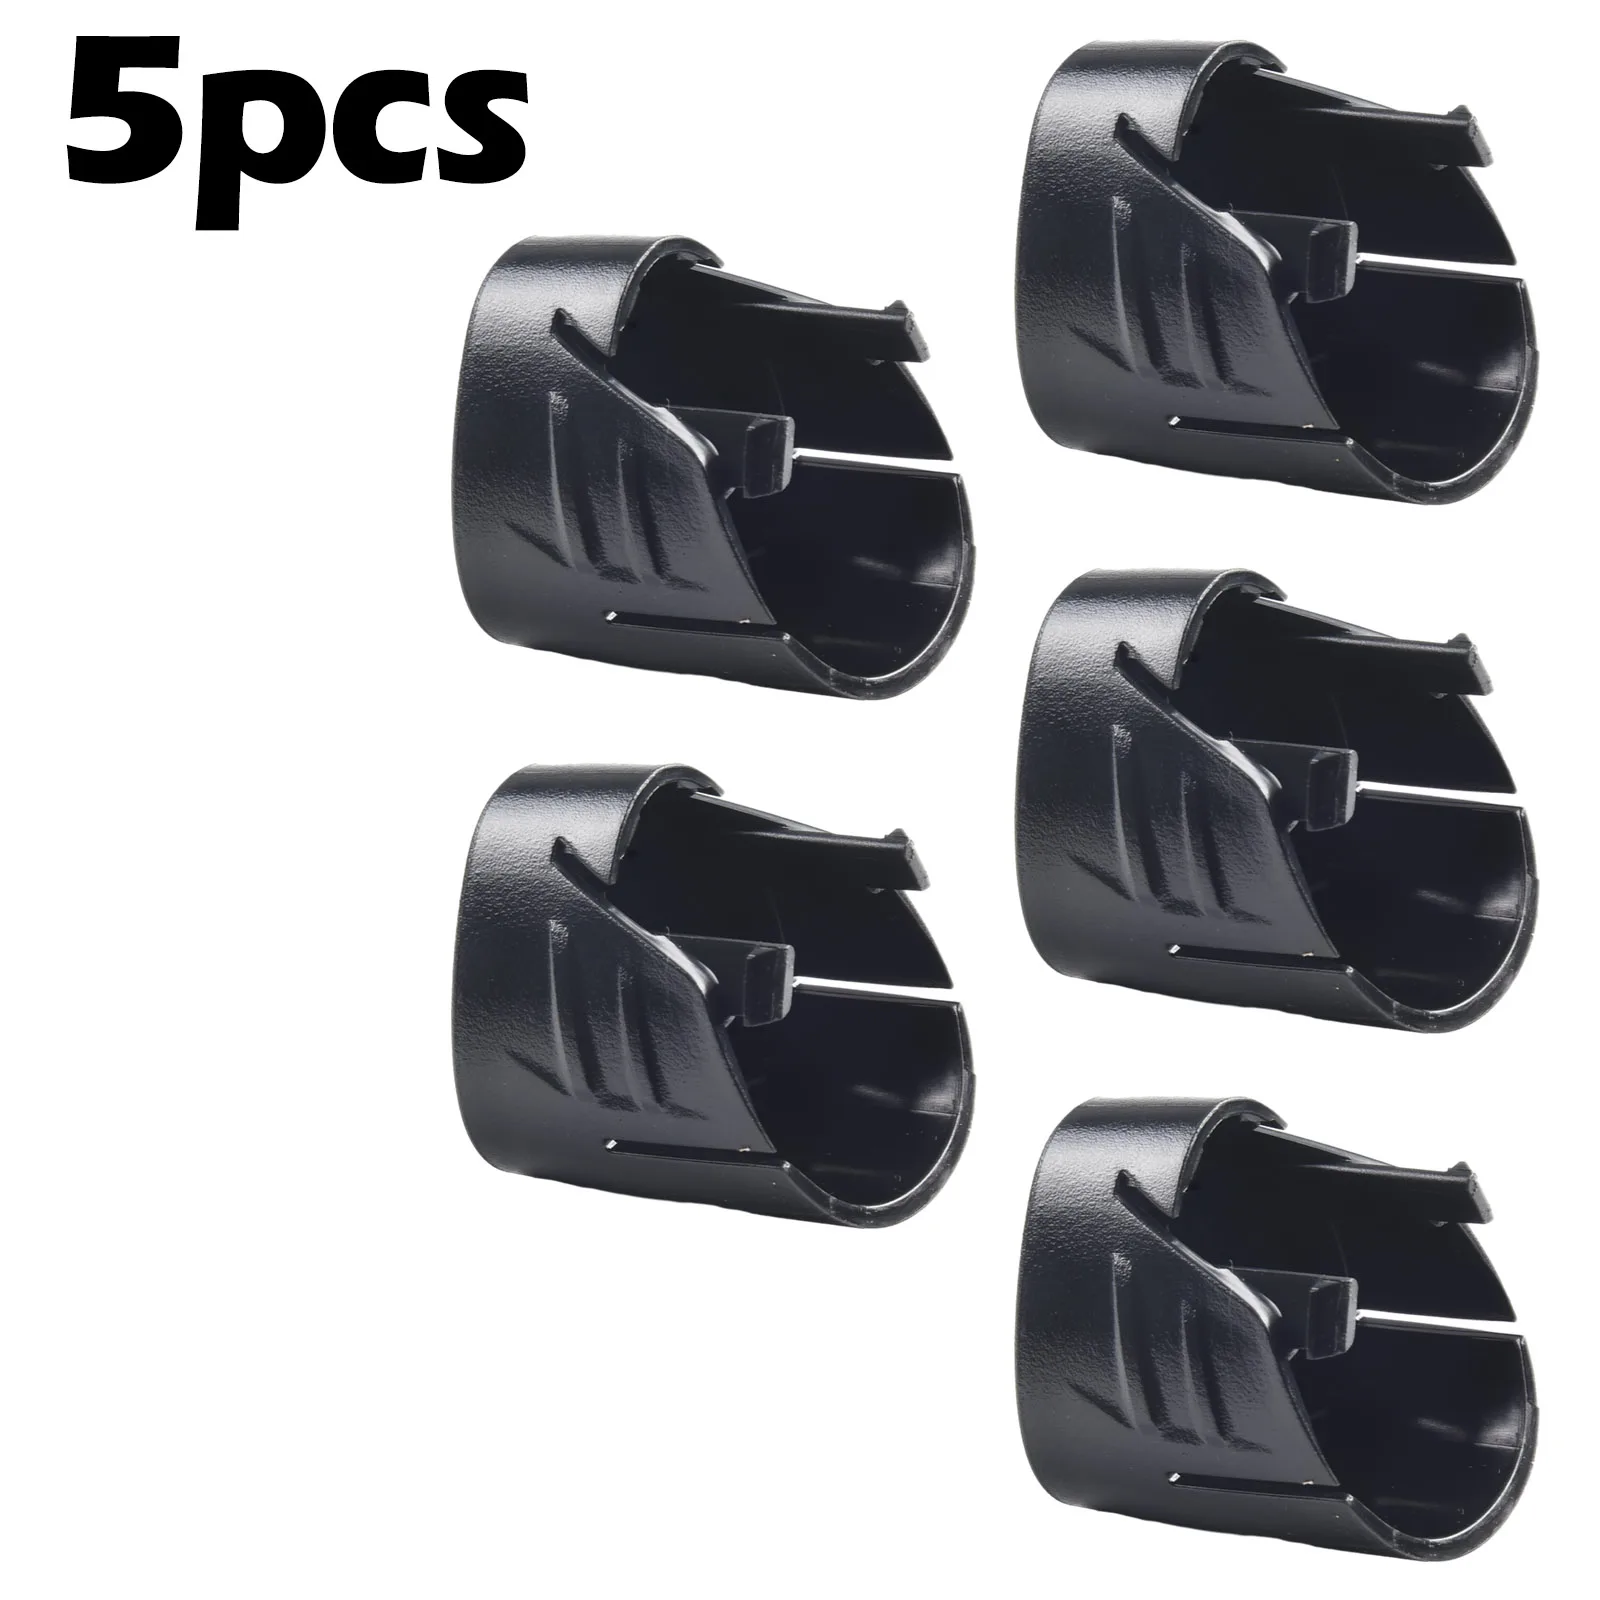 

5PCS Plastic Bottom Shell Case Box Parts For Milwaukee 48-11-2411 For Plastic Batteries Chargers Fittings Accessories